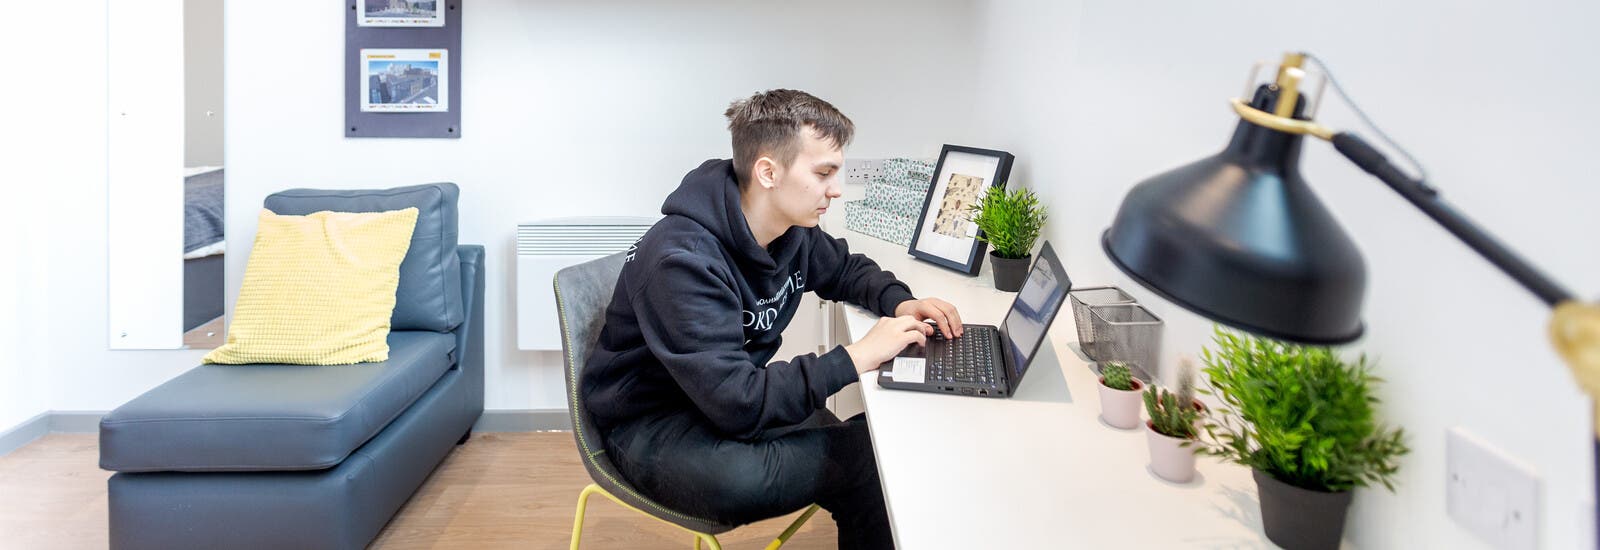 Student working on laptop at desk in accommodation